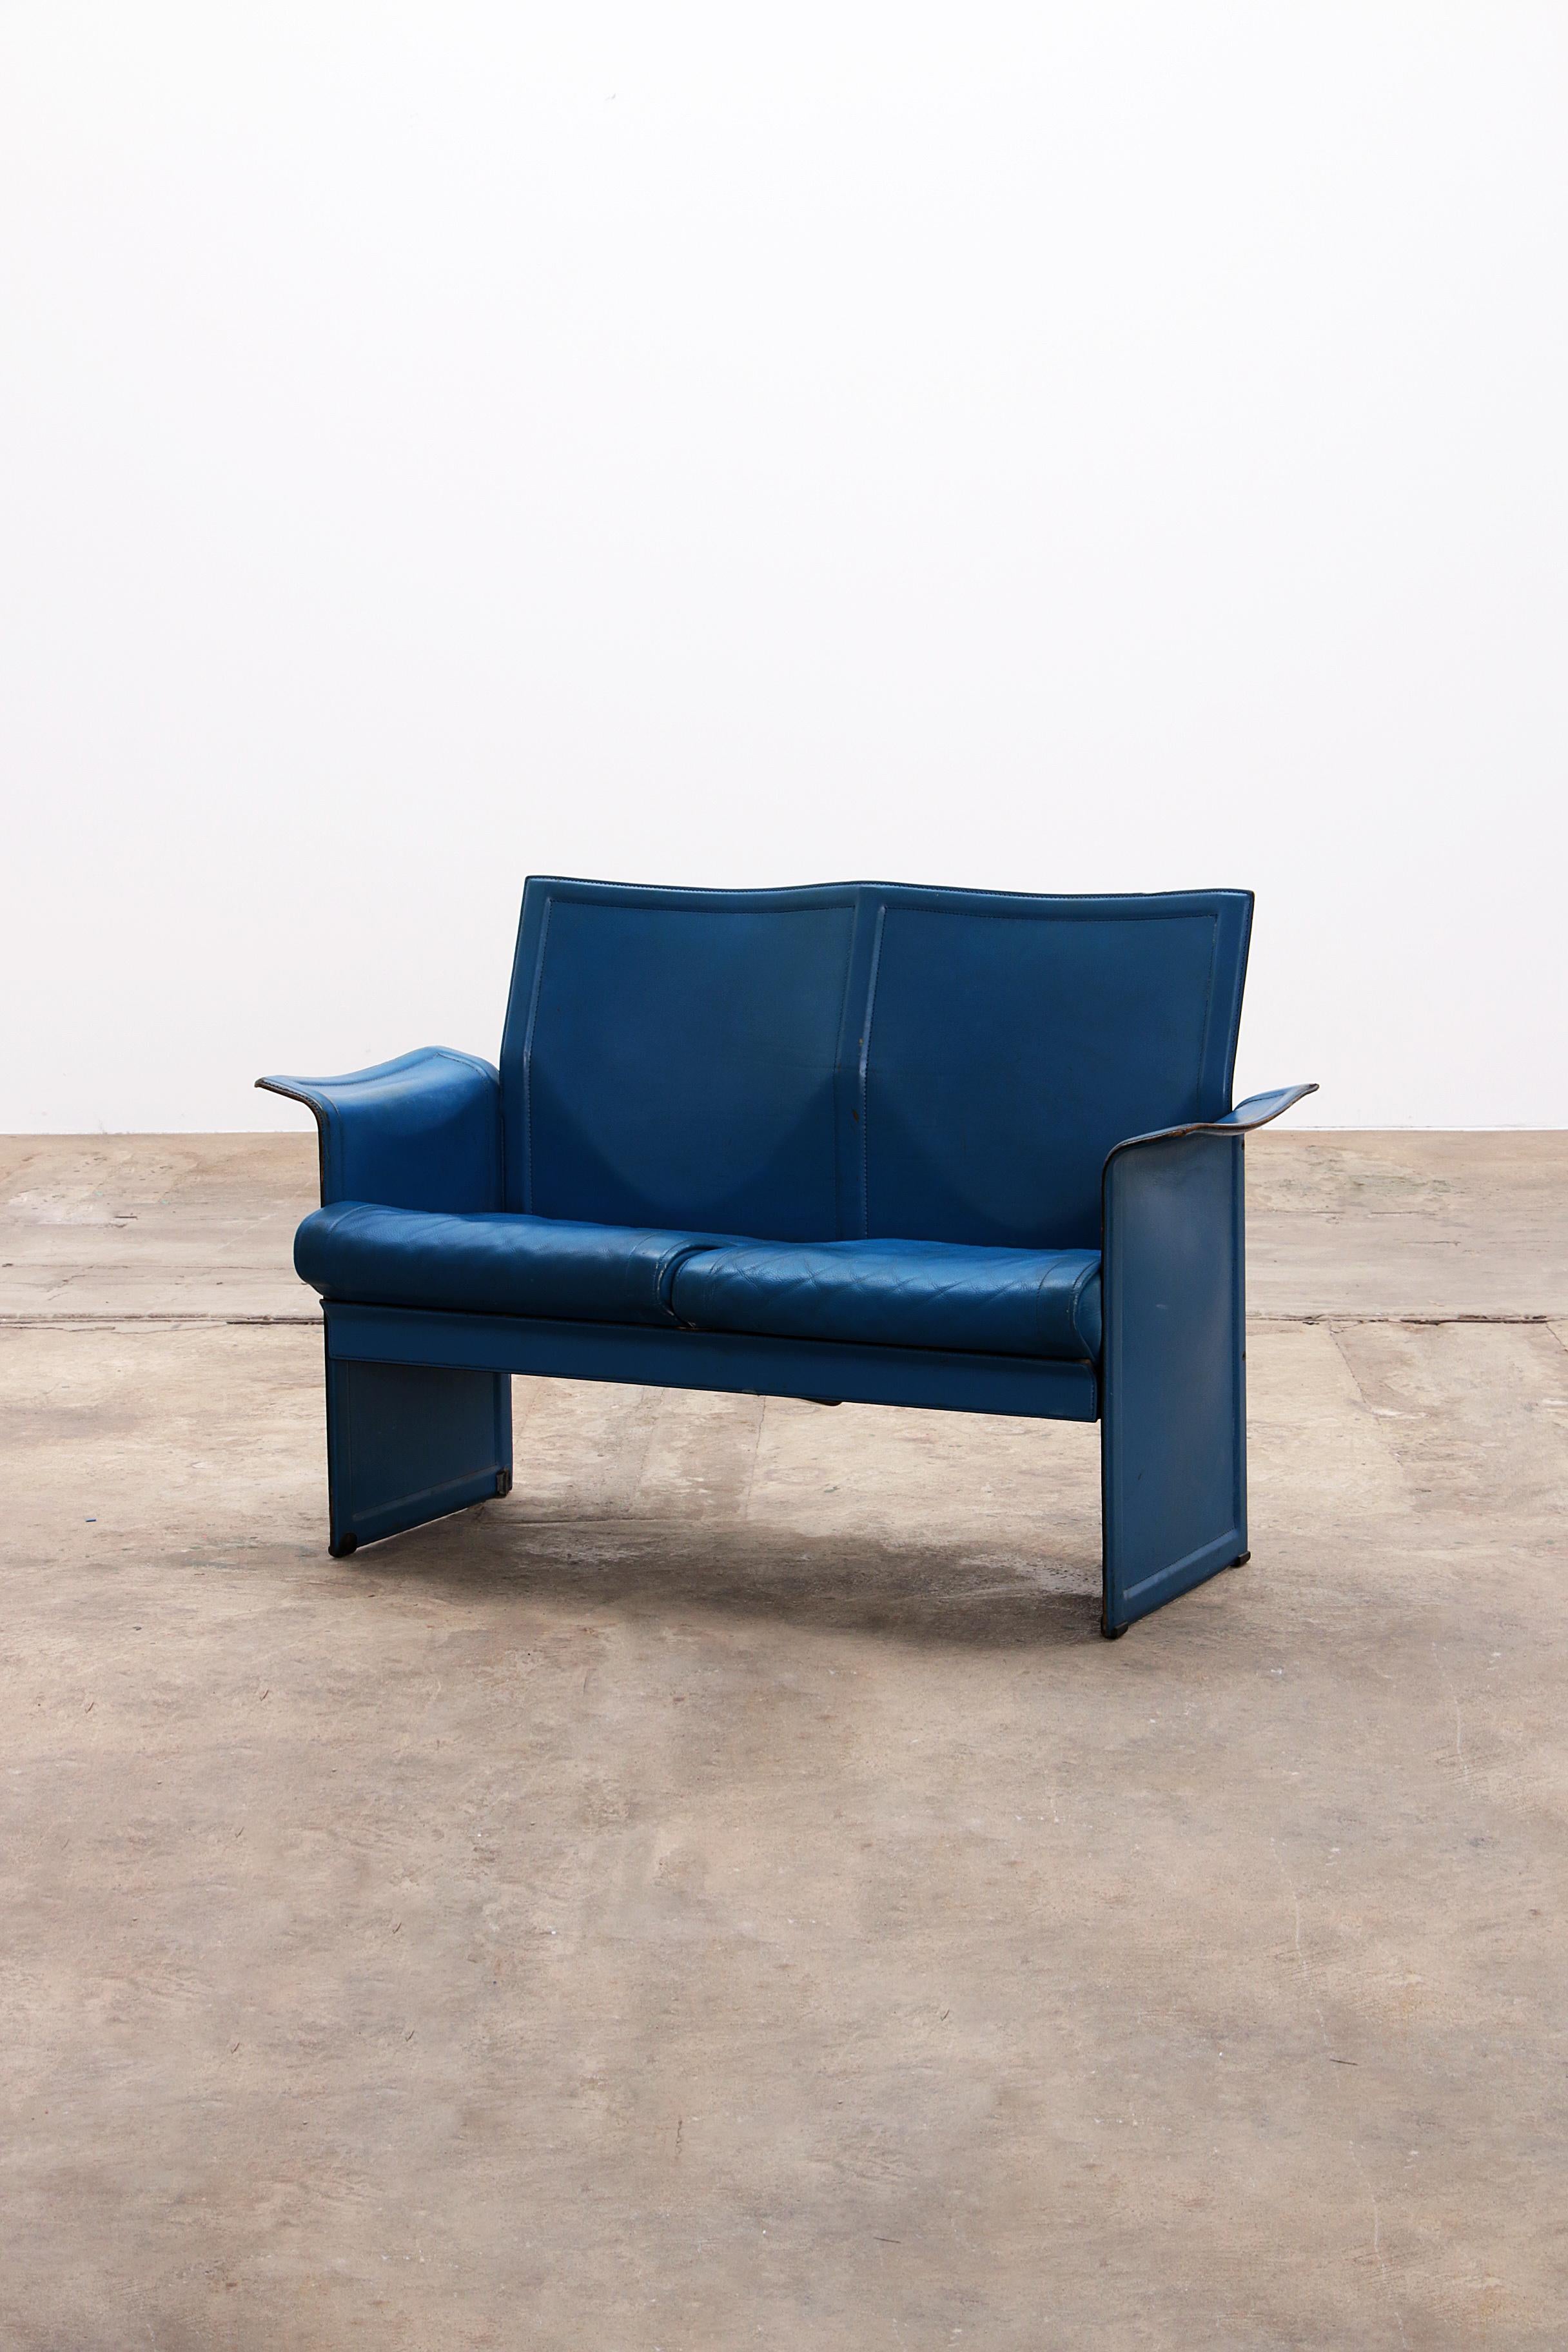 The series designed by Tito Agnoli for Matteo Grassi

in the 1970s is an absolutely timeless design that still fits in every living room today. This blue leather 2 seater is in very good condition.

The leather of the frame, as well as the seat